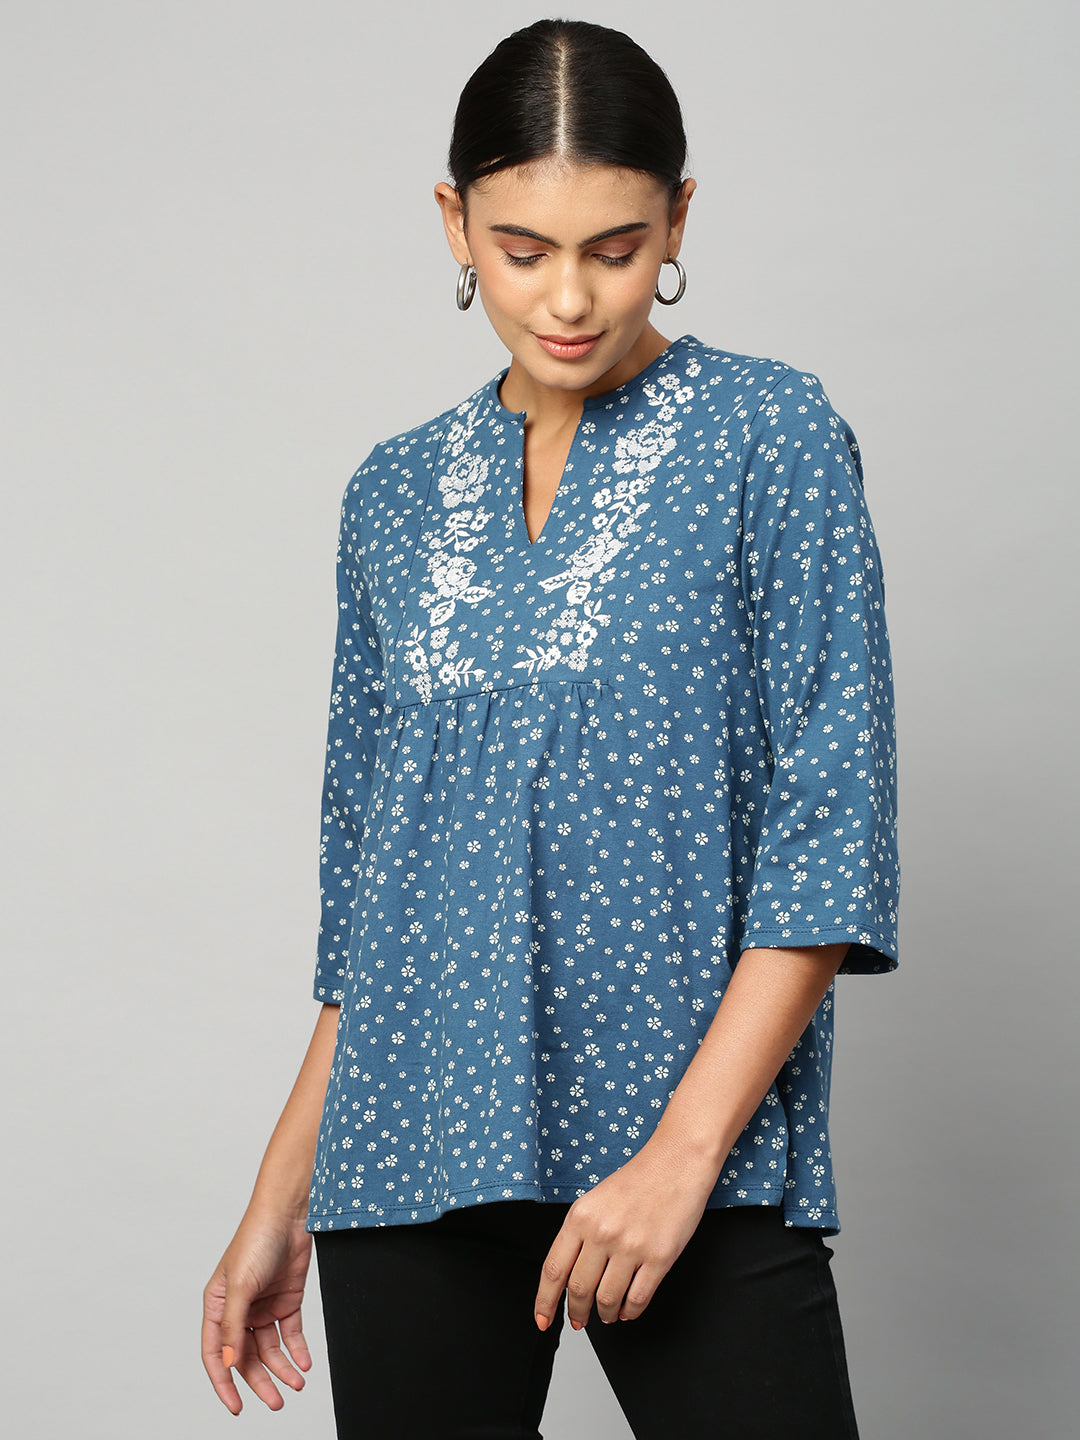 Embroidered Printed Jersey Tunic Top